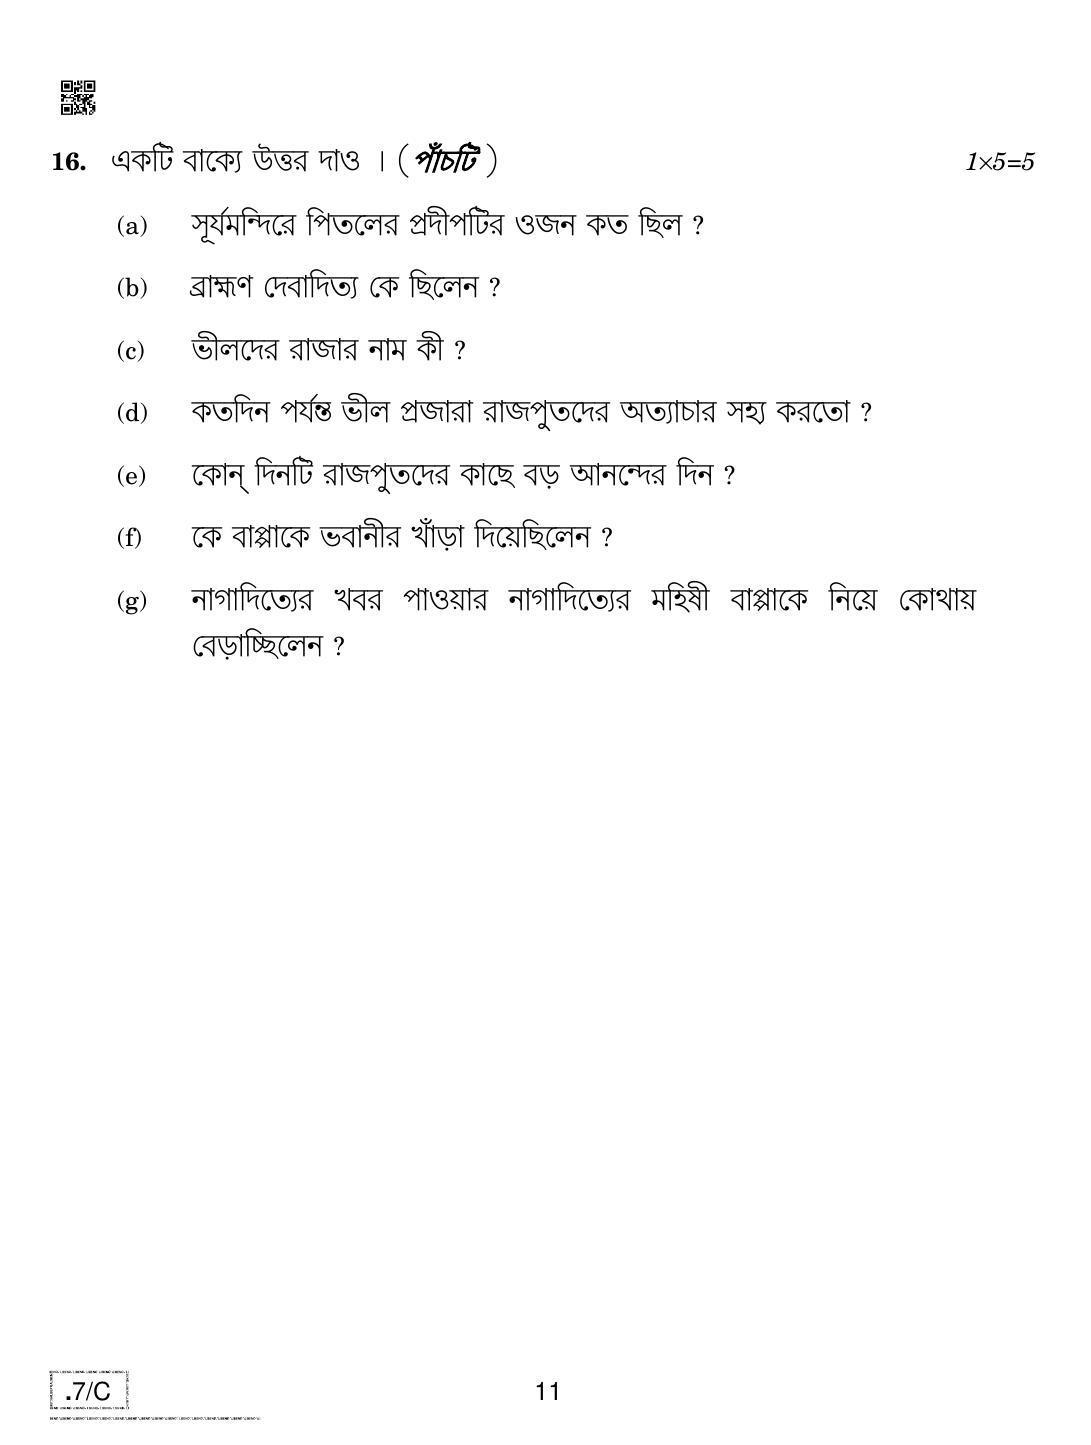 CBSE Class 10 Bengali 2020 Compartment Question Paper - Page 11